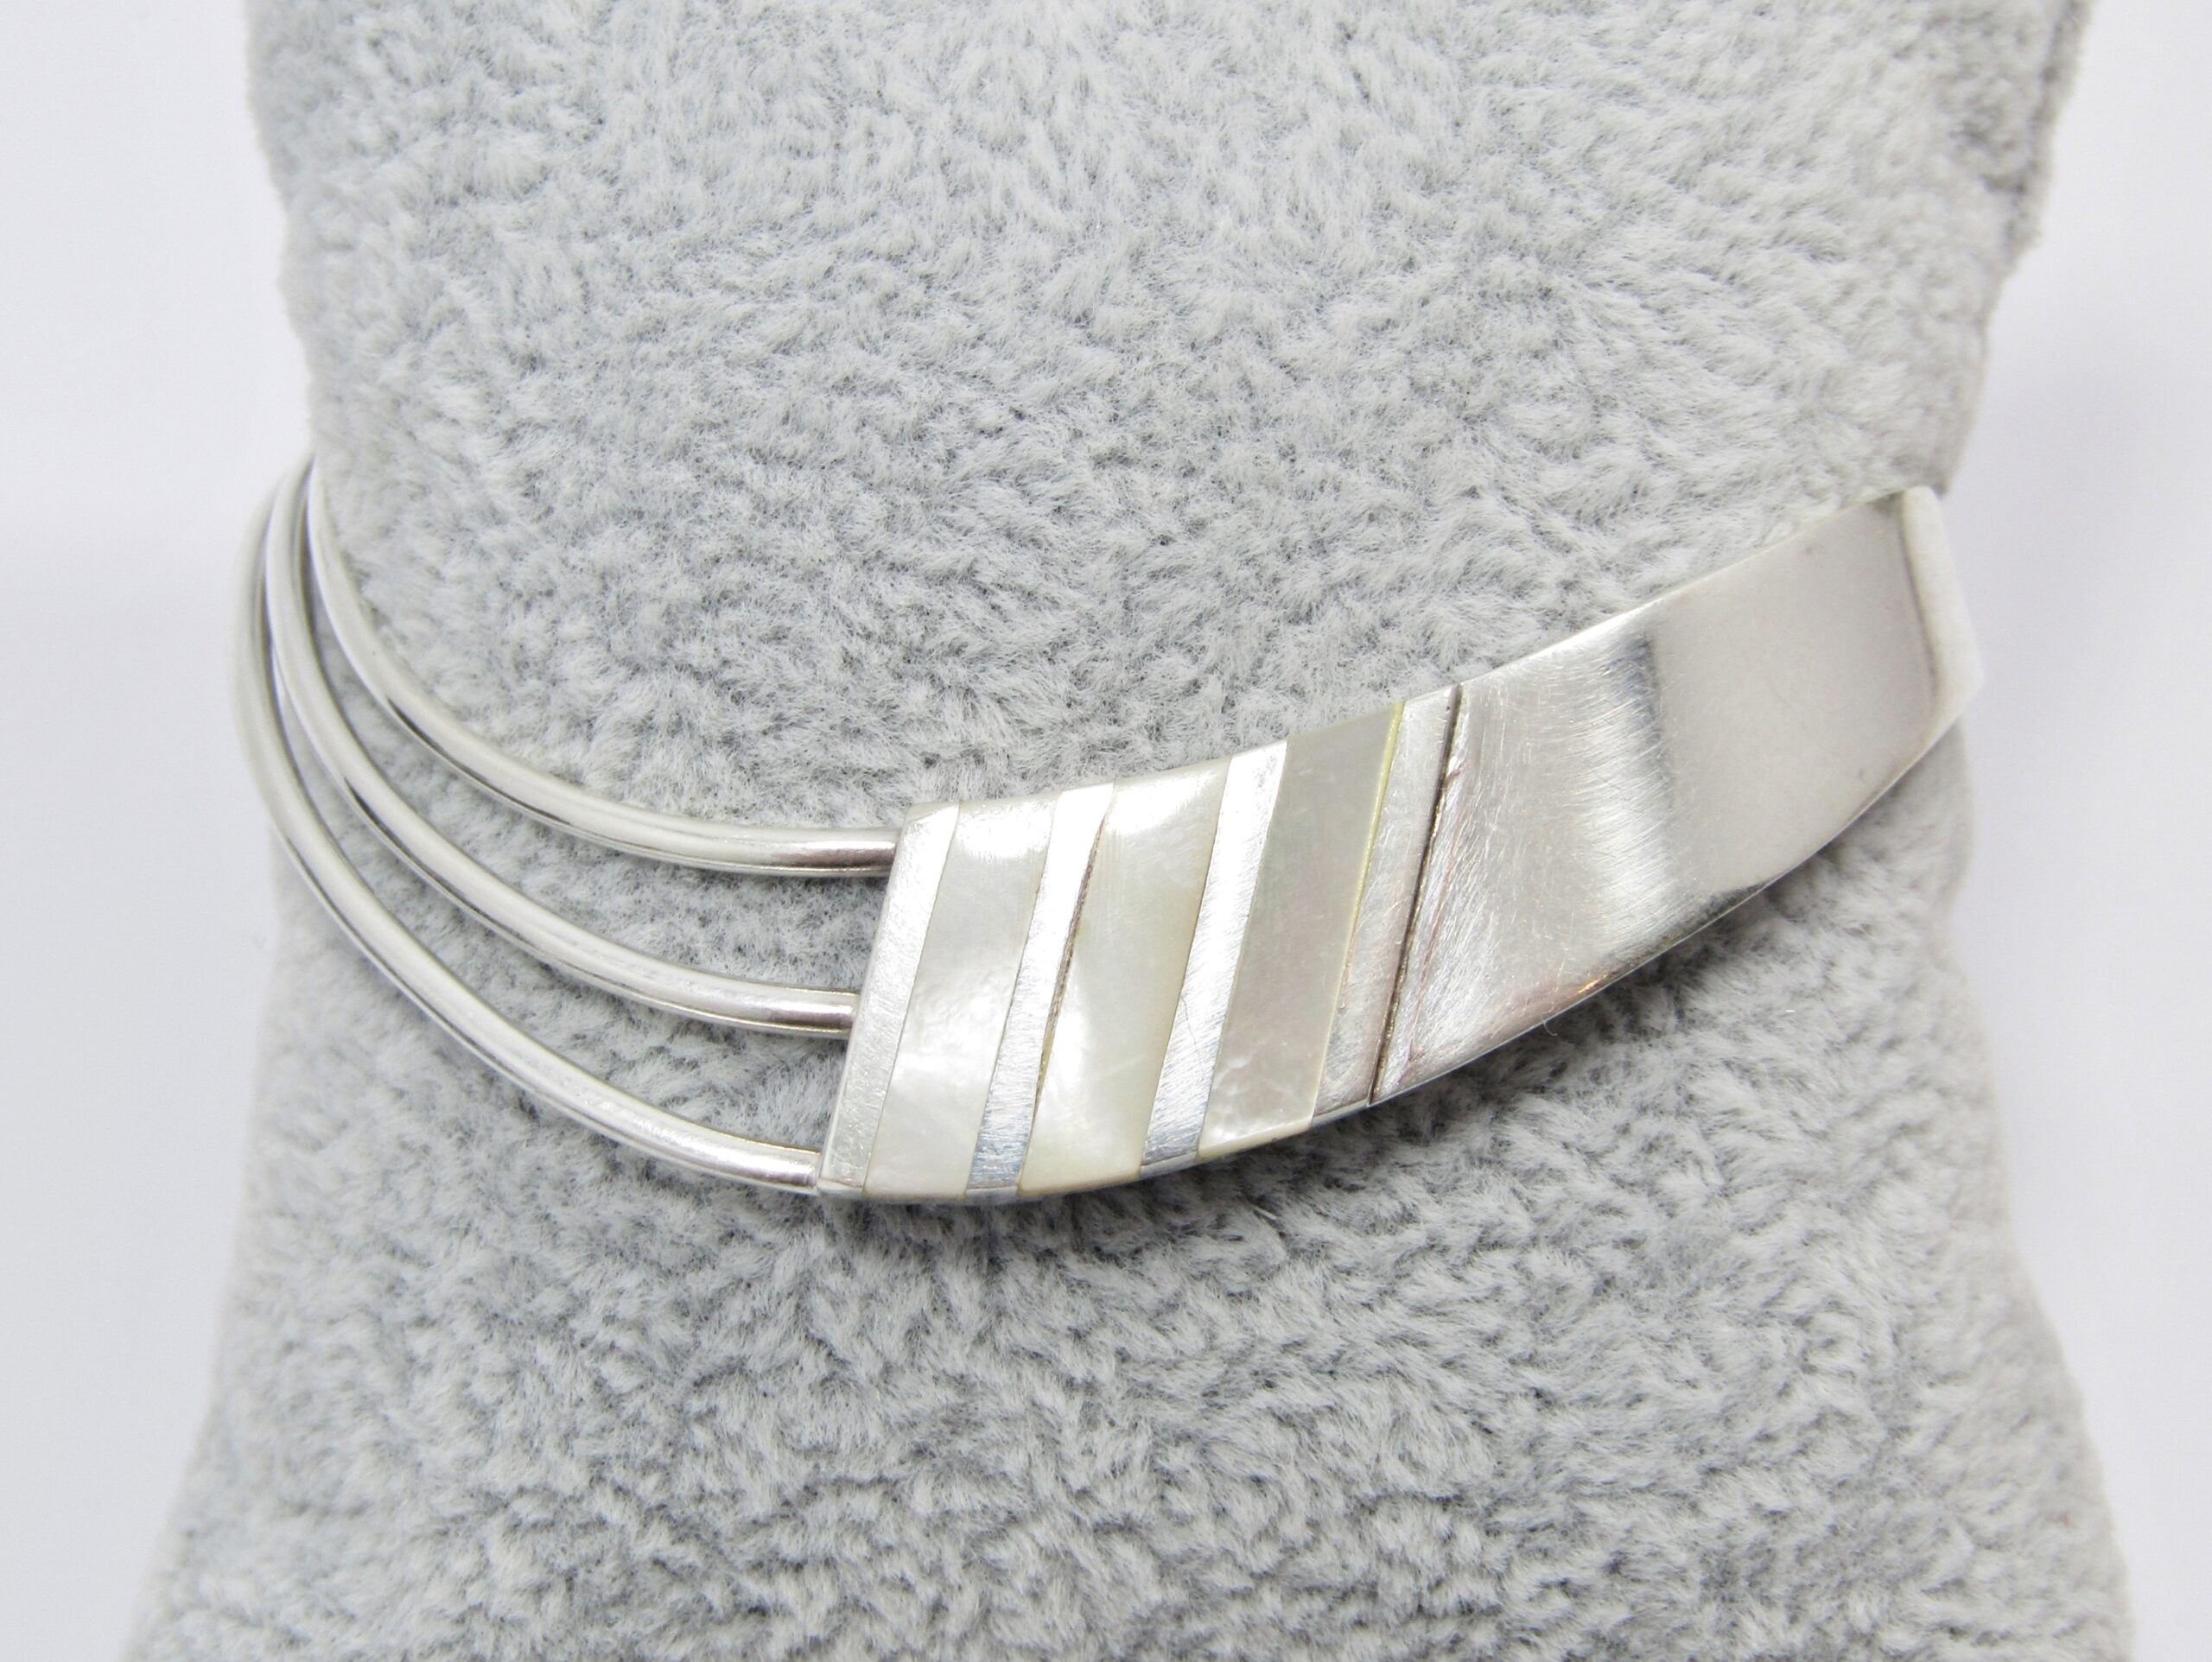 A Stunning Fancy Design Cuff Bangle With a Mother of Pearl Inlay in Sterling Silver.